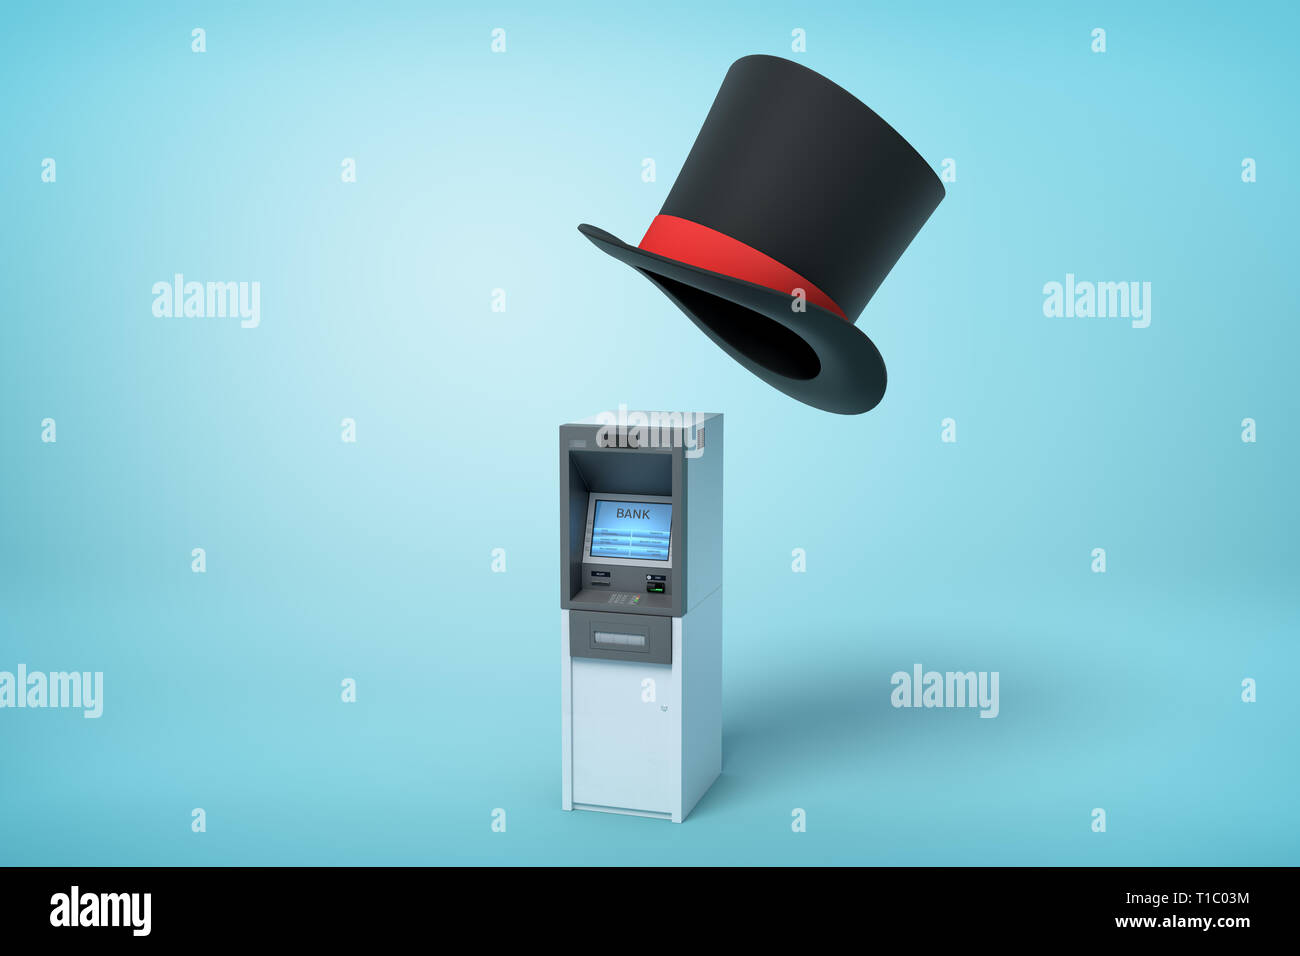 3d rendering of ATM and big black tophat floating in air above it on light blue background. Stock Photo